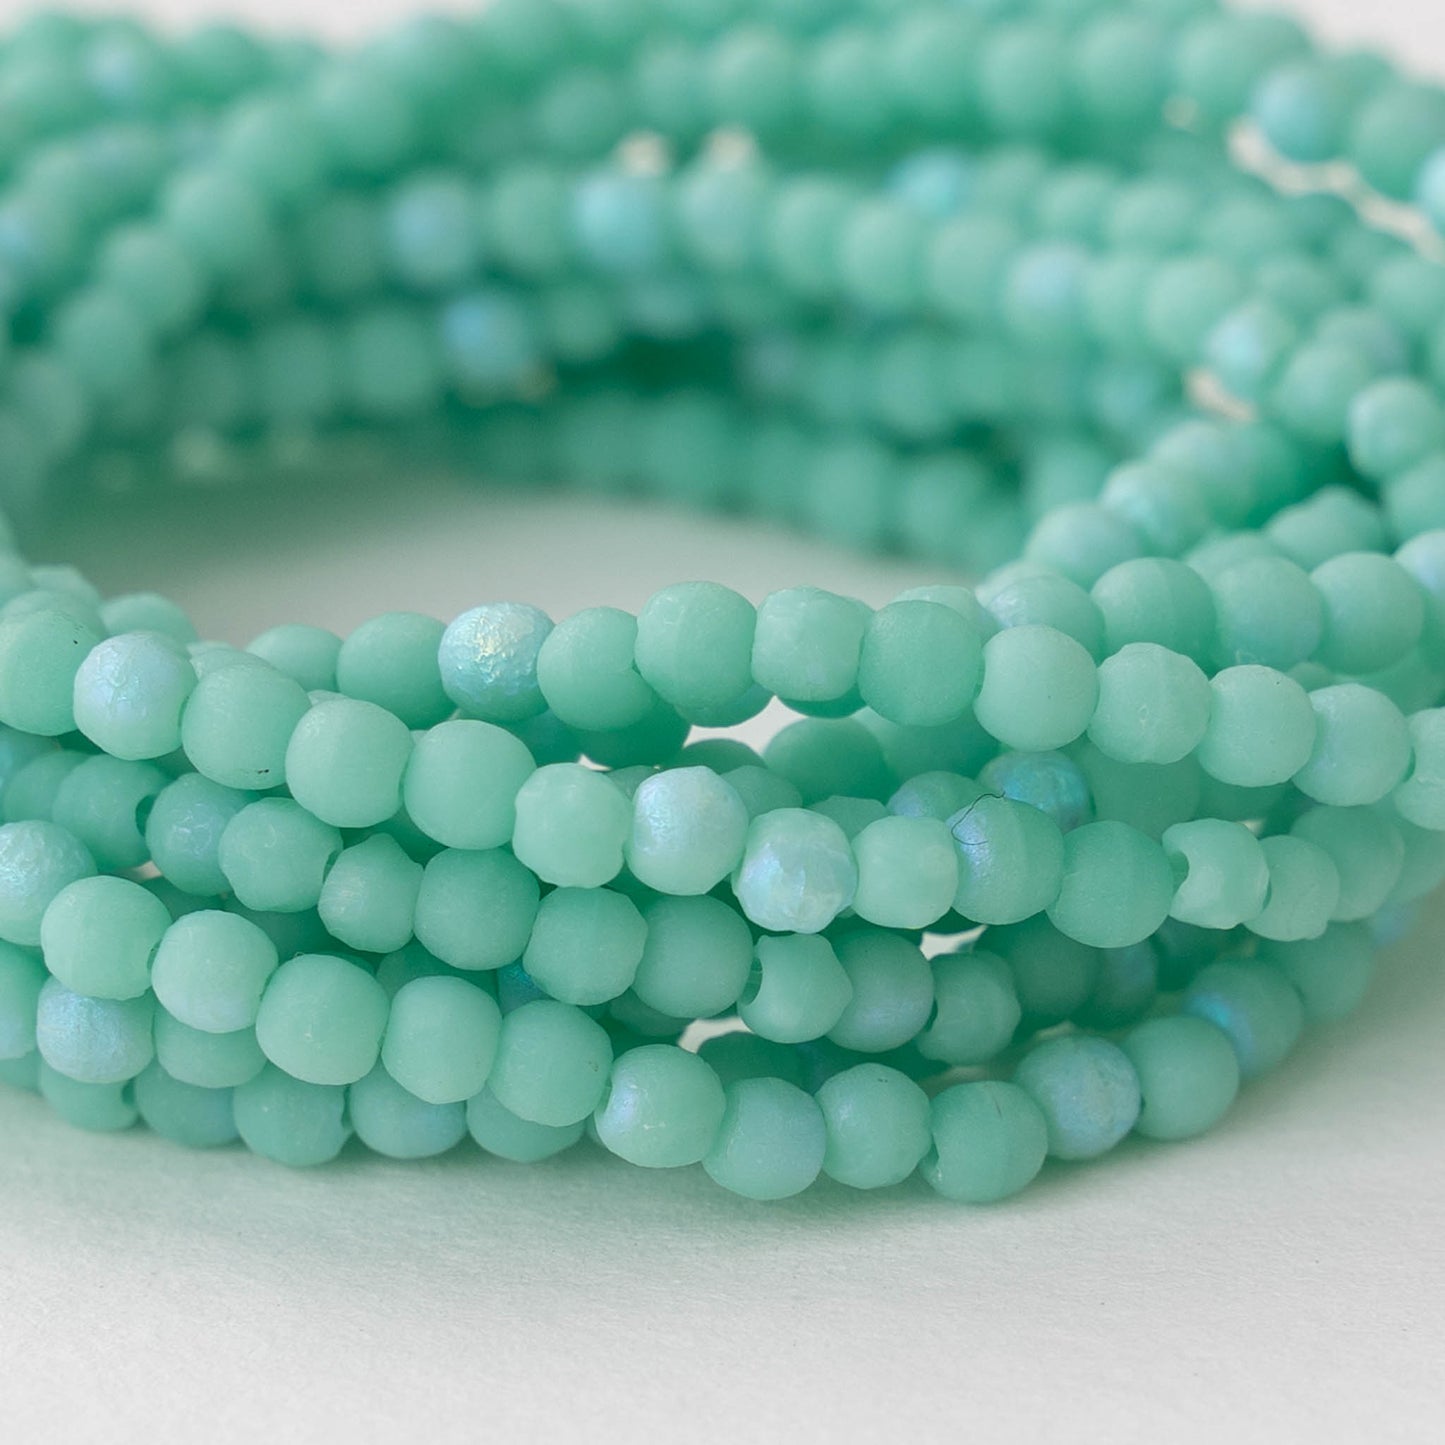 3mm Round Glass Beads - Etched Seafoam AB - 50 Beads